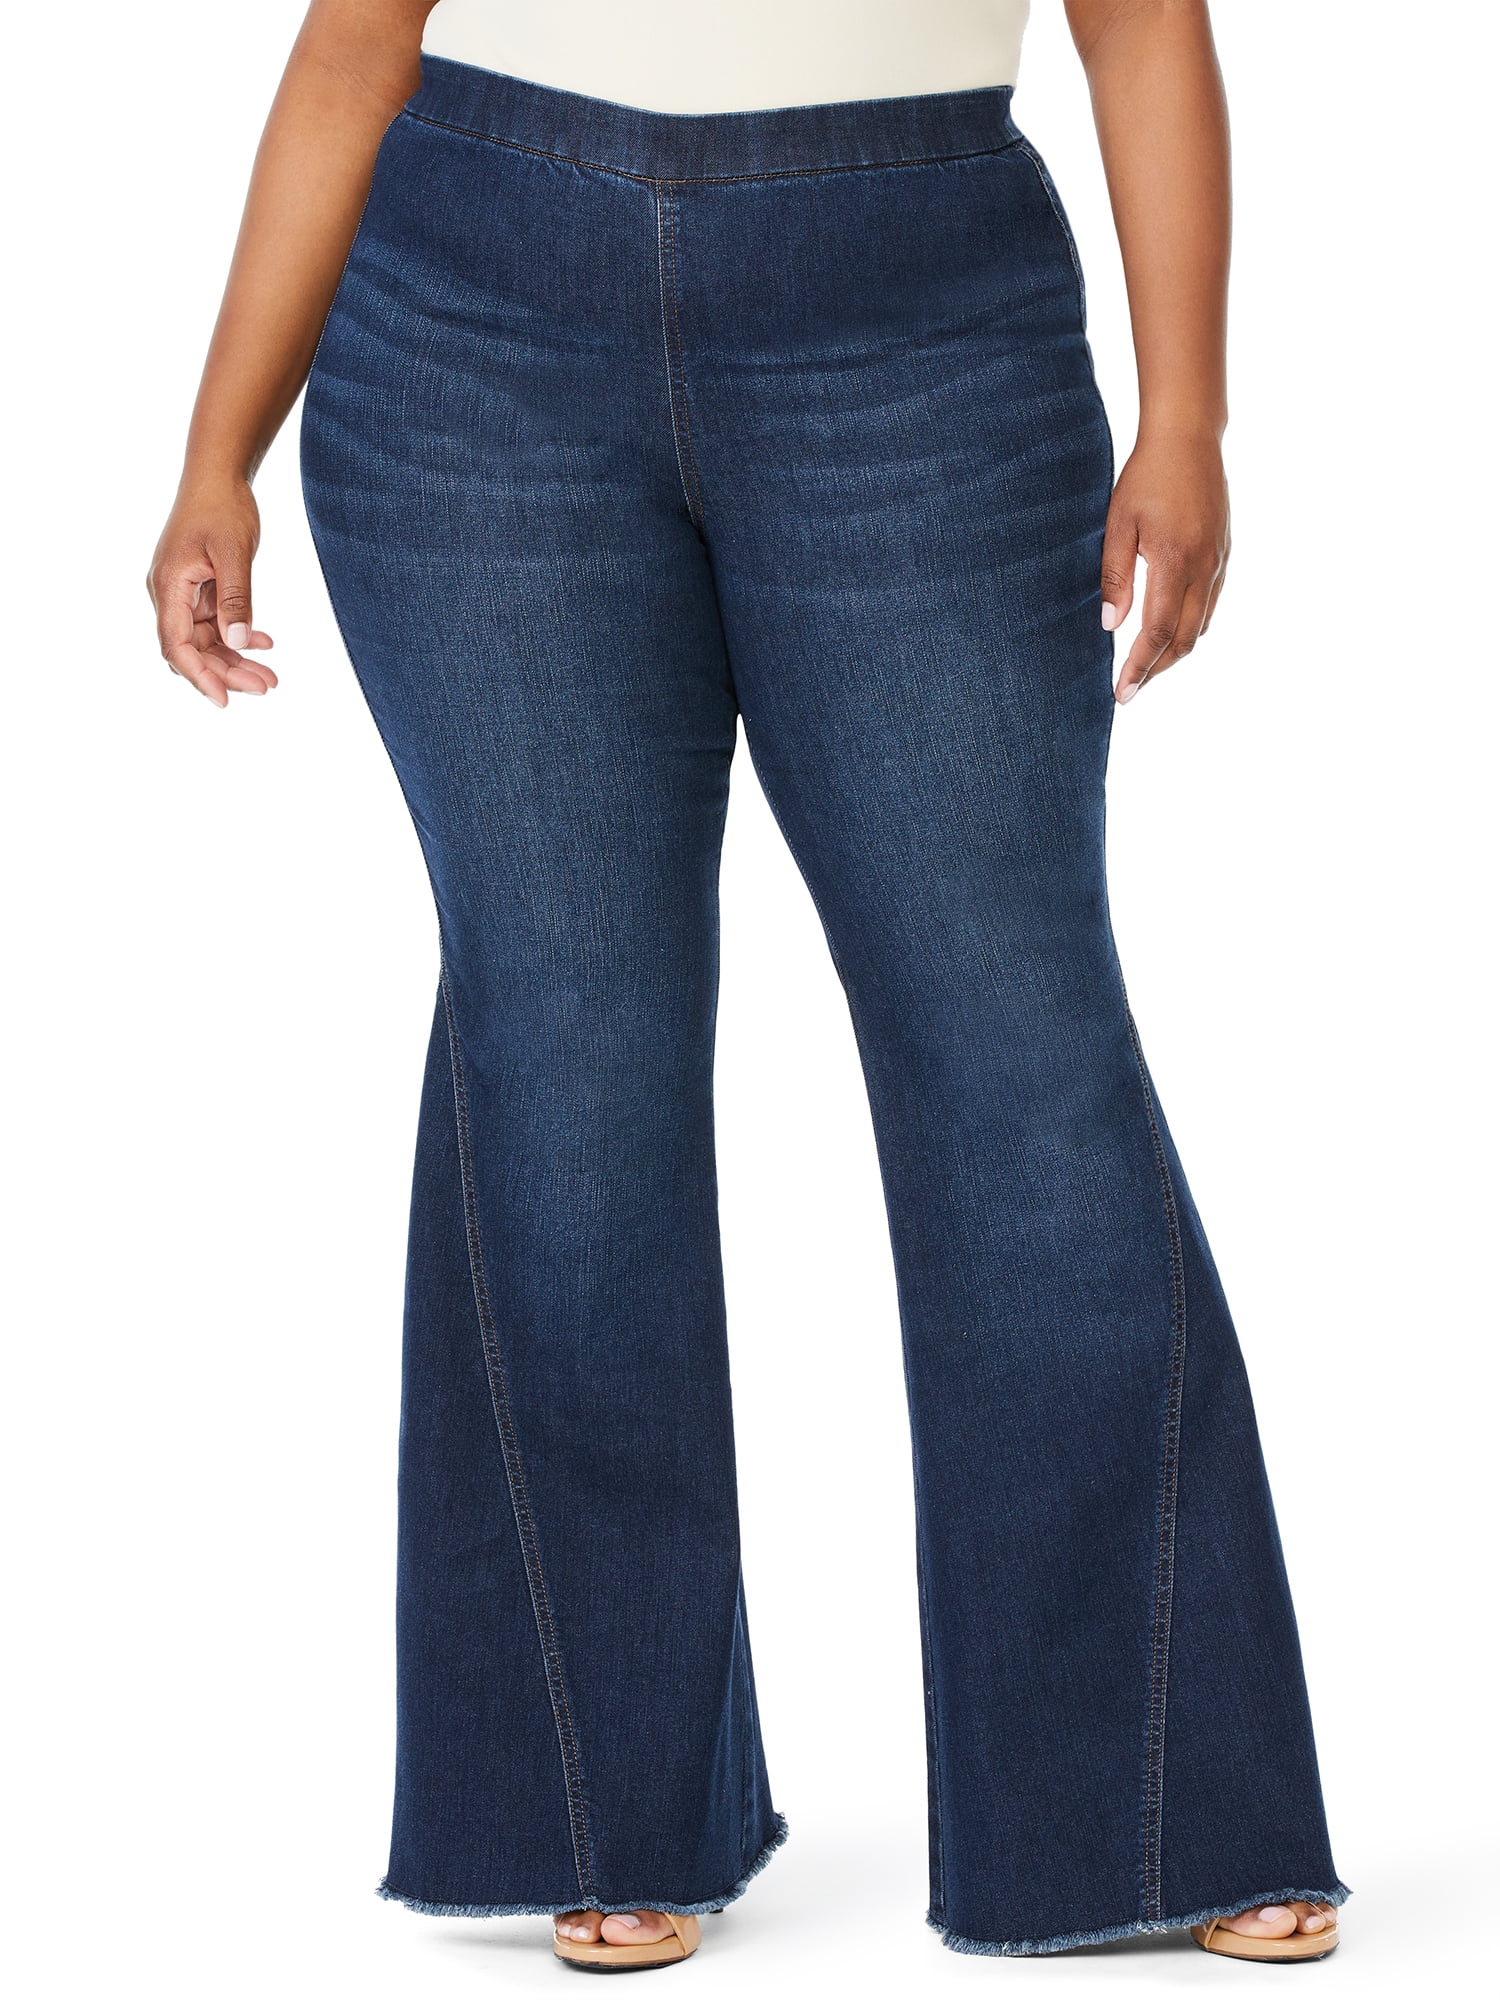 Sofia Jeans Womens Plus Size Melisa Curvy High Rise Super Flare Pull On Jeans